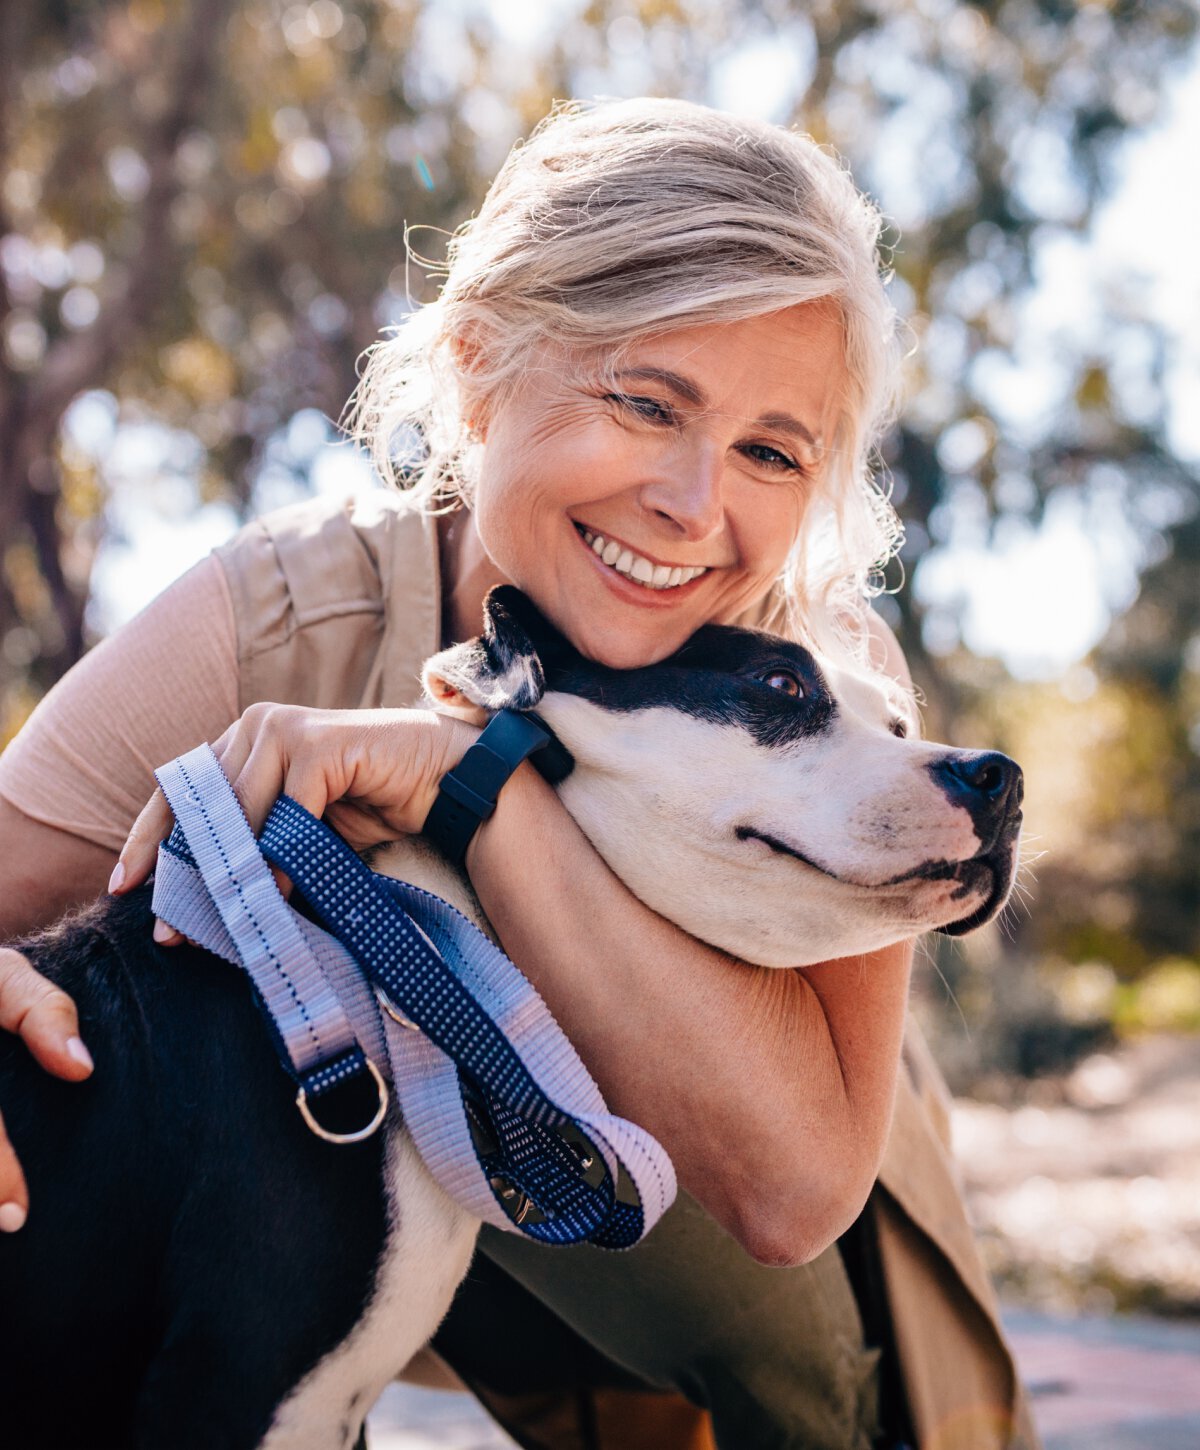 beverly hills TMJ disorder treatment patient model with dog